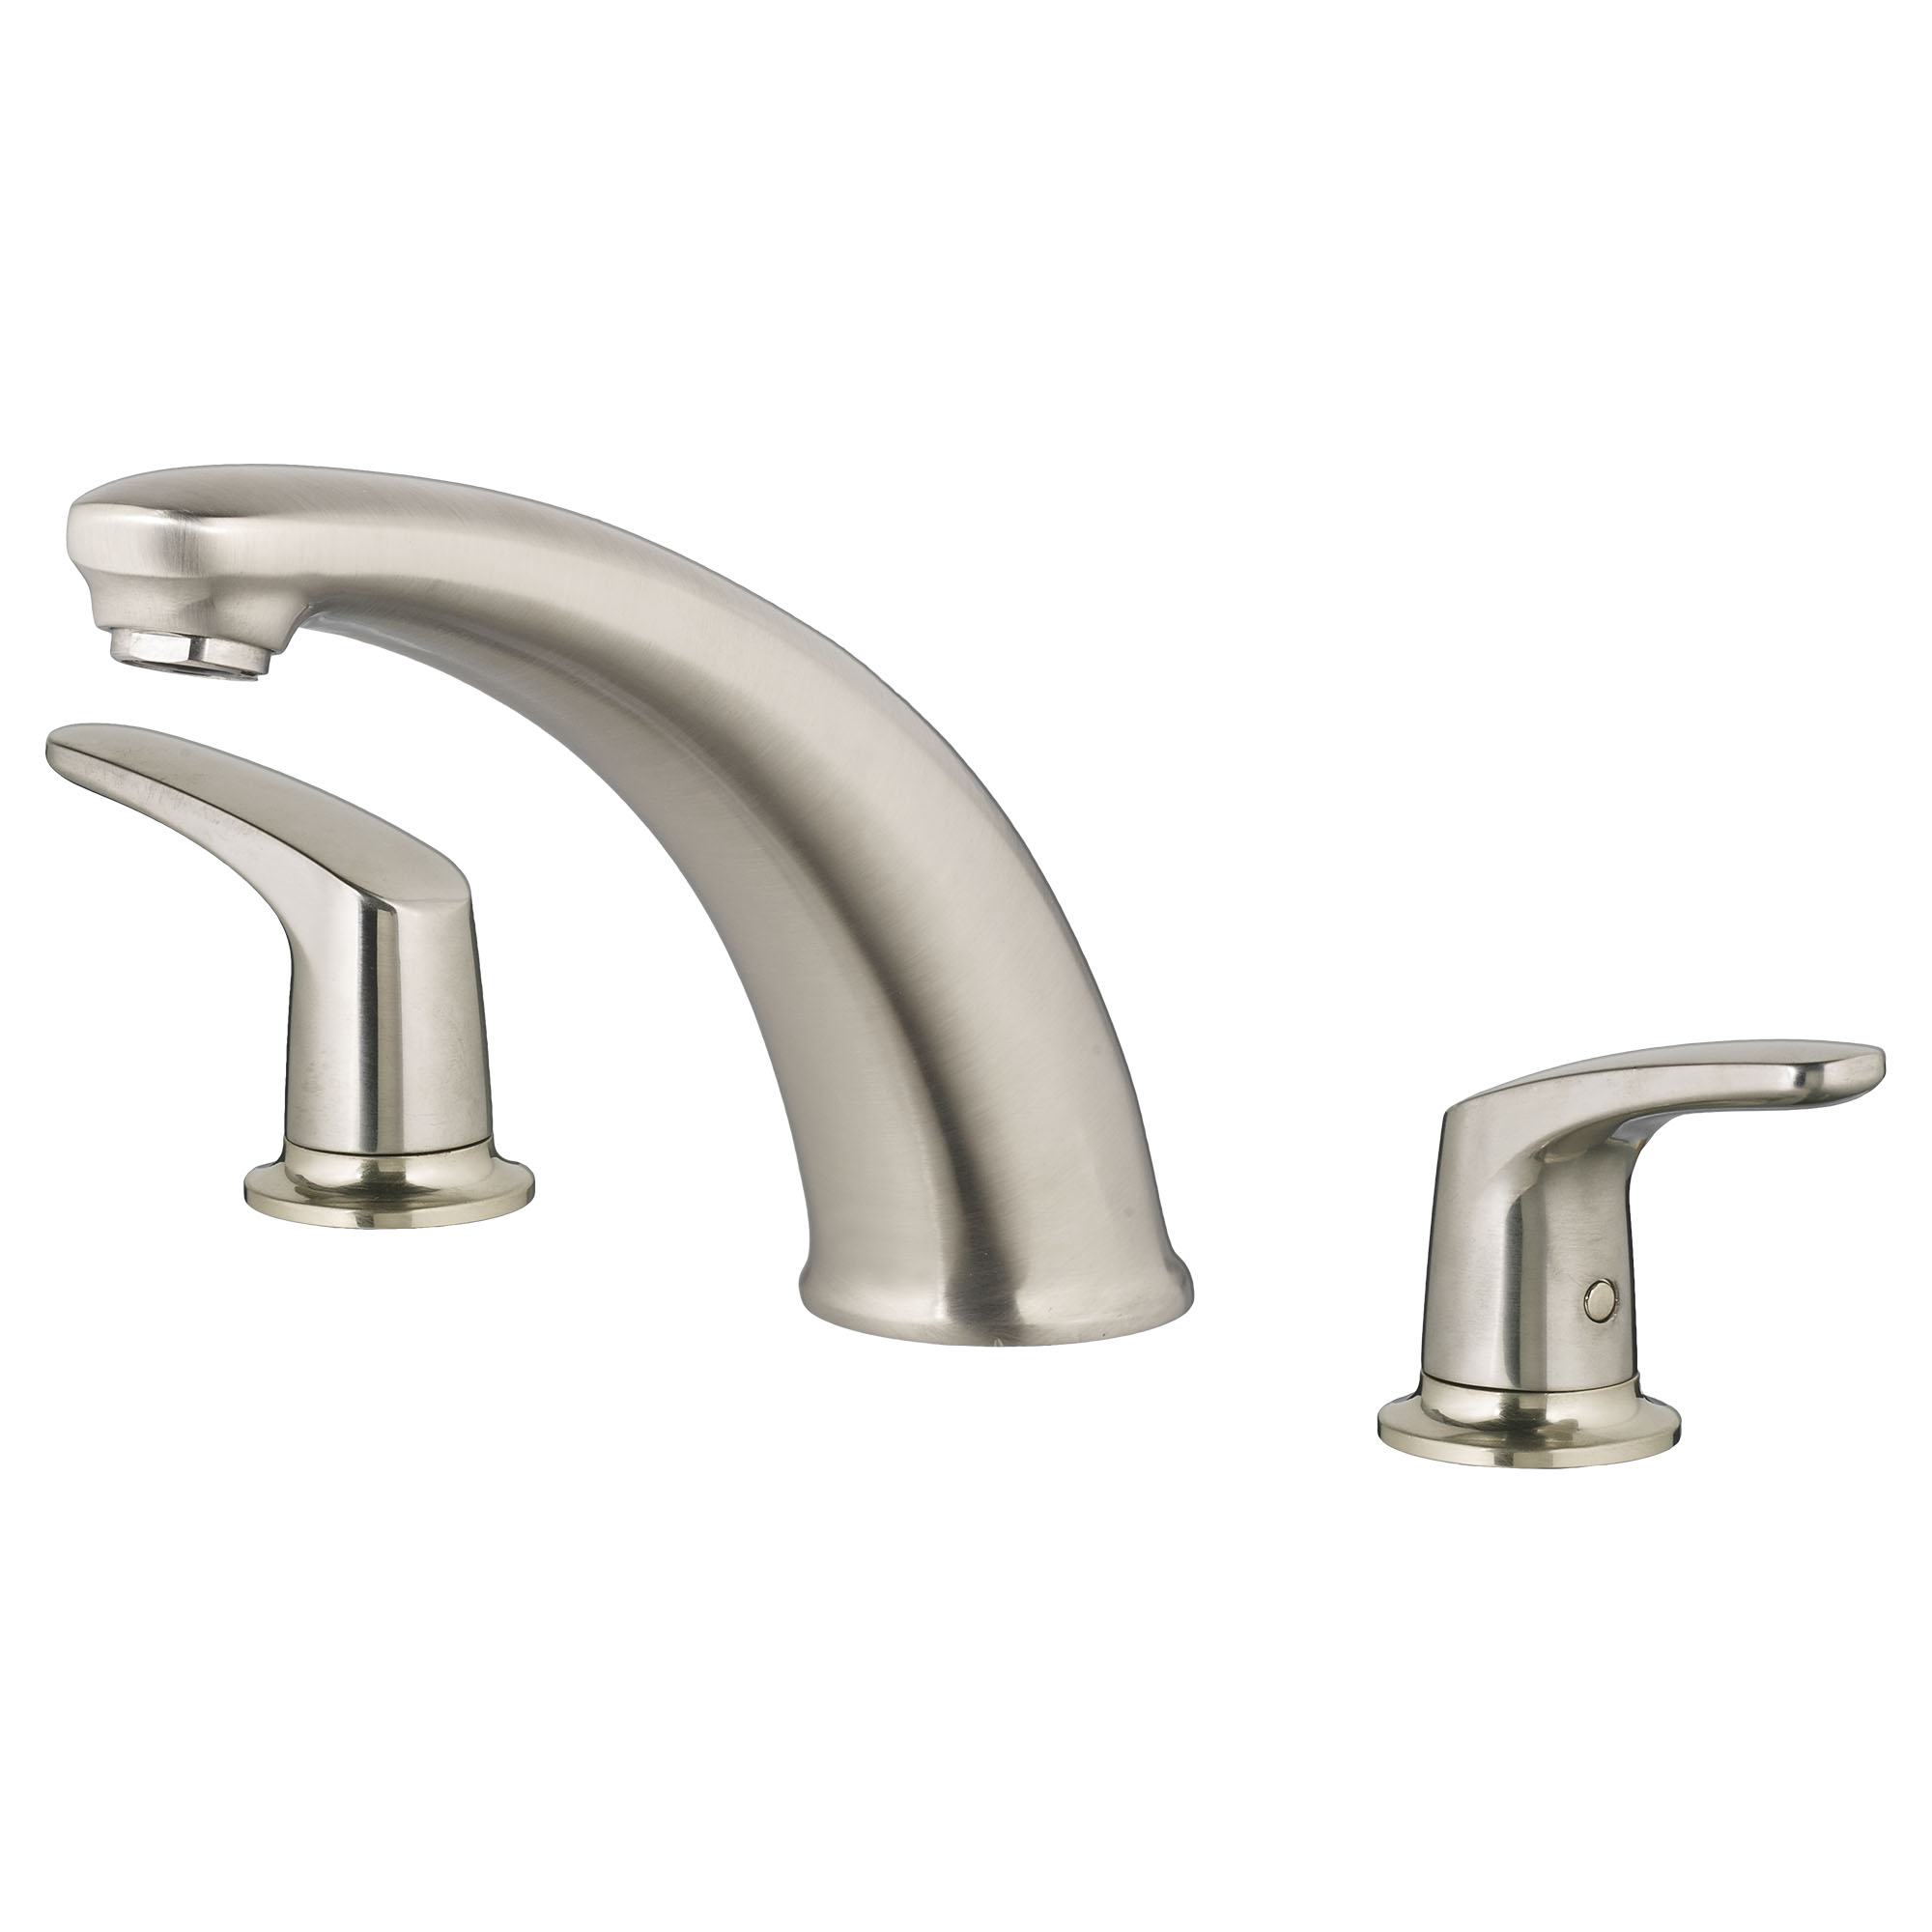 Colony® PRO Bathtub Faucet Trim With Lever Handles for Flash® Rough-In Valve